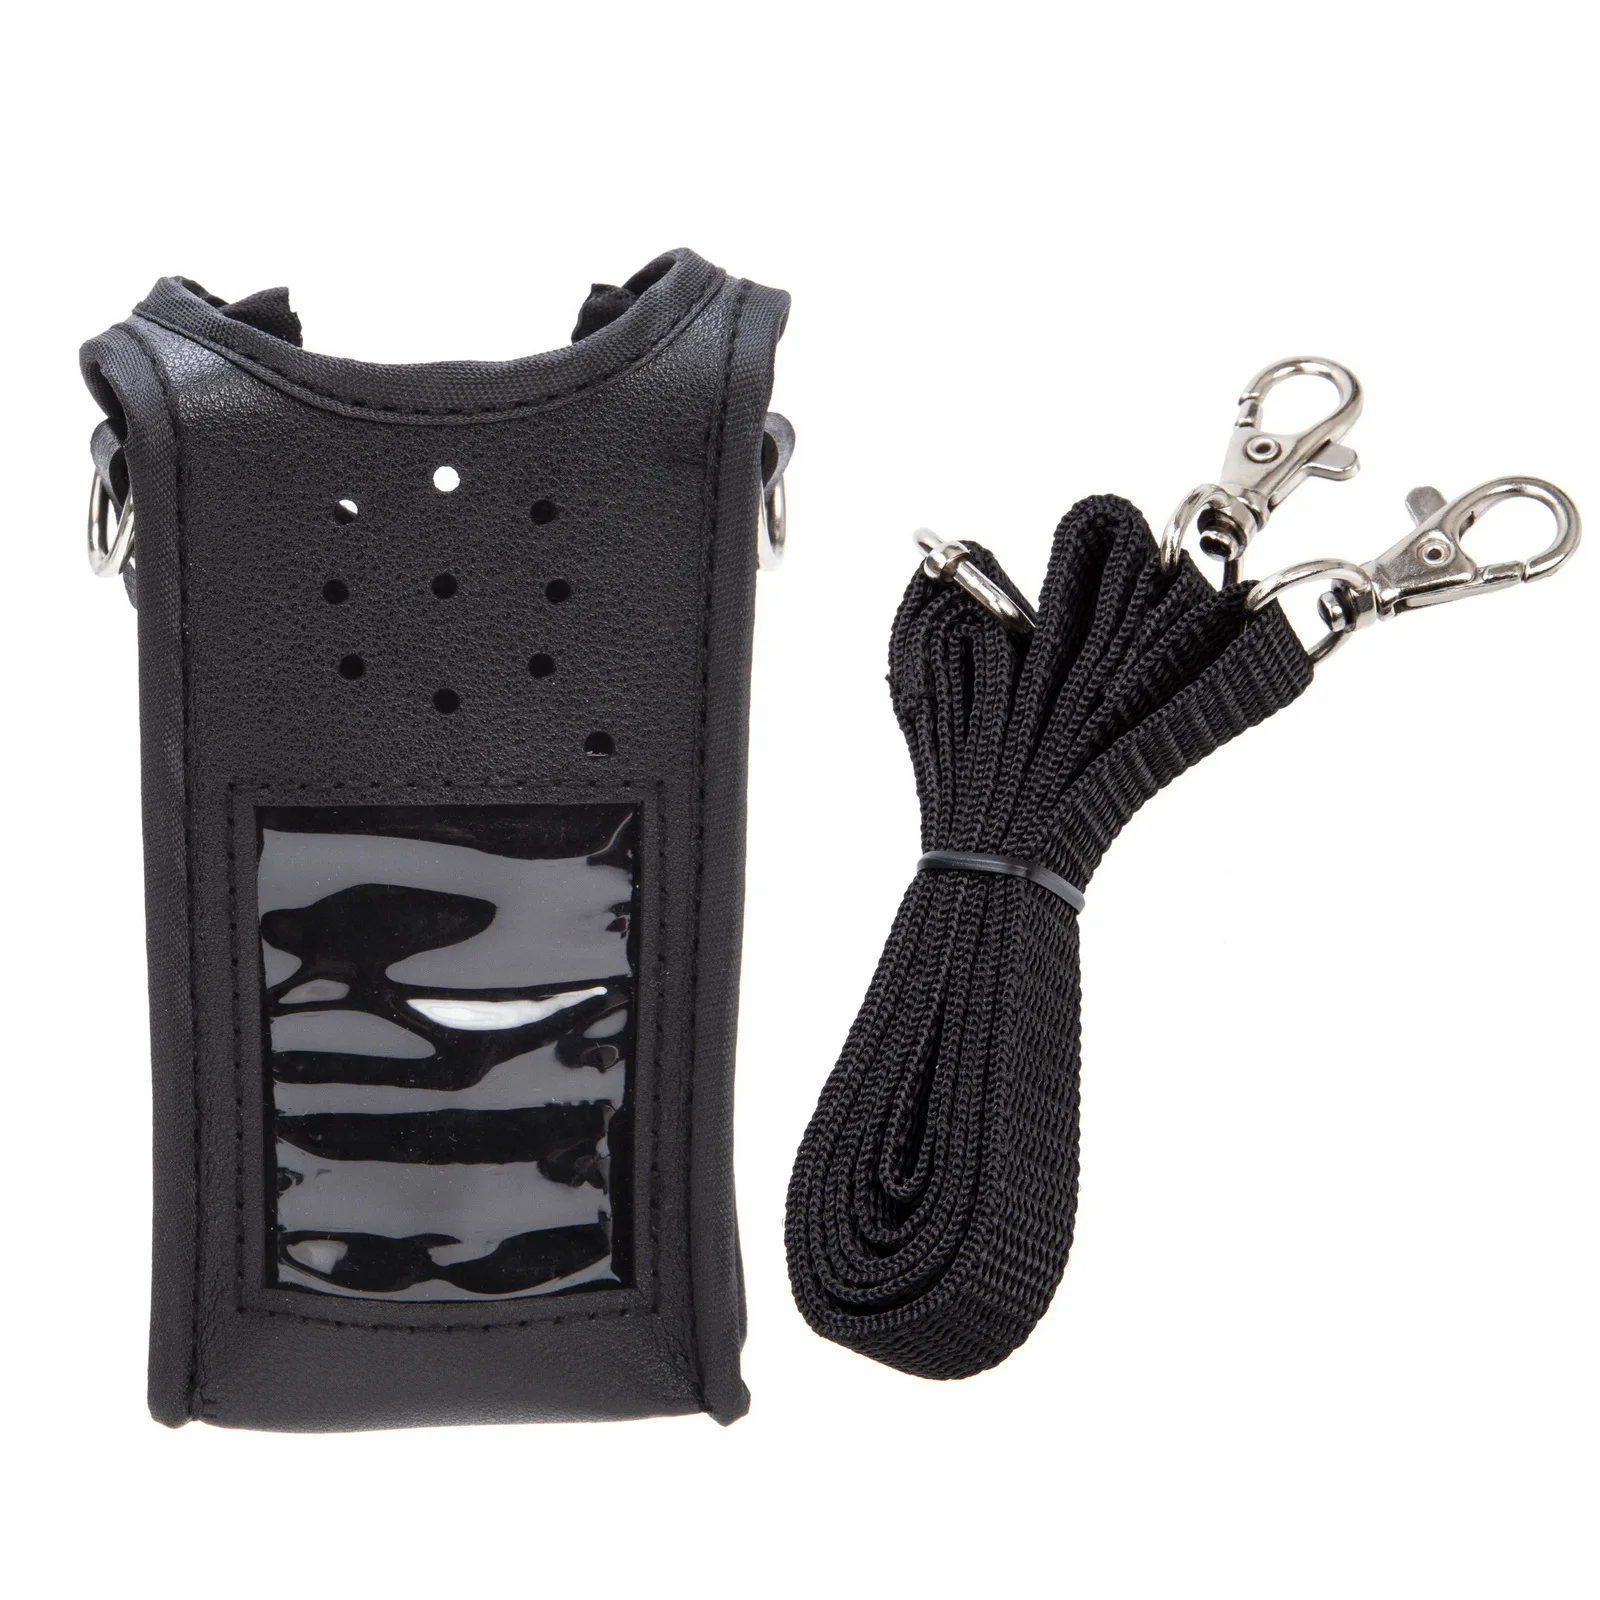 Walkie Talkie Leather Soft Case Cover For Baofeng UV-9R Plus BF-A58 BF-9700 GT-3WP UV-XR UV-5S Two Way Radio Accessories